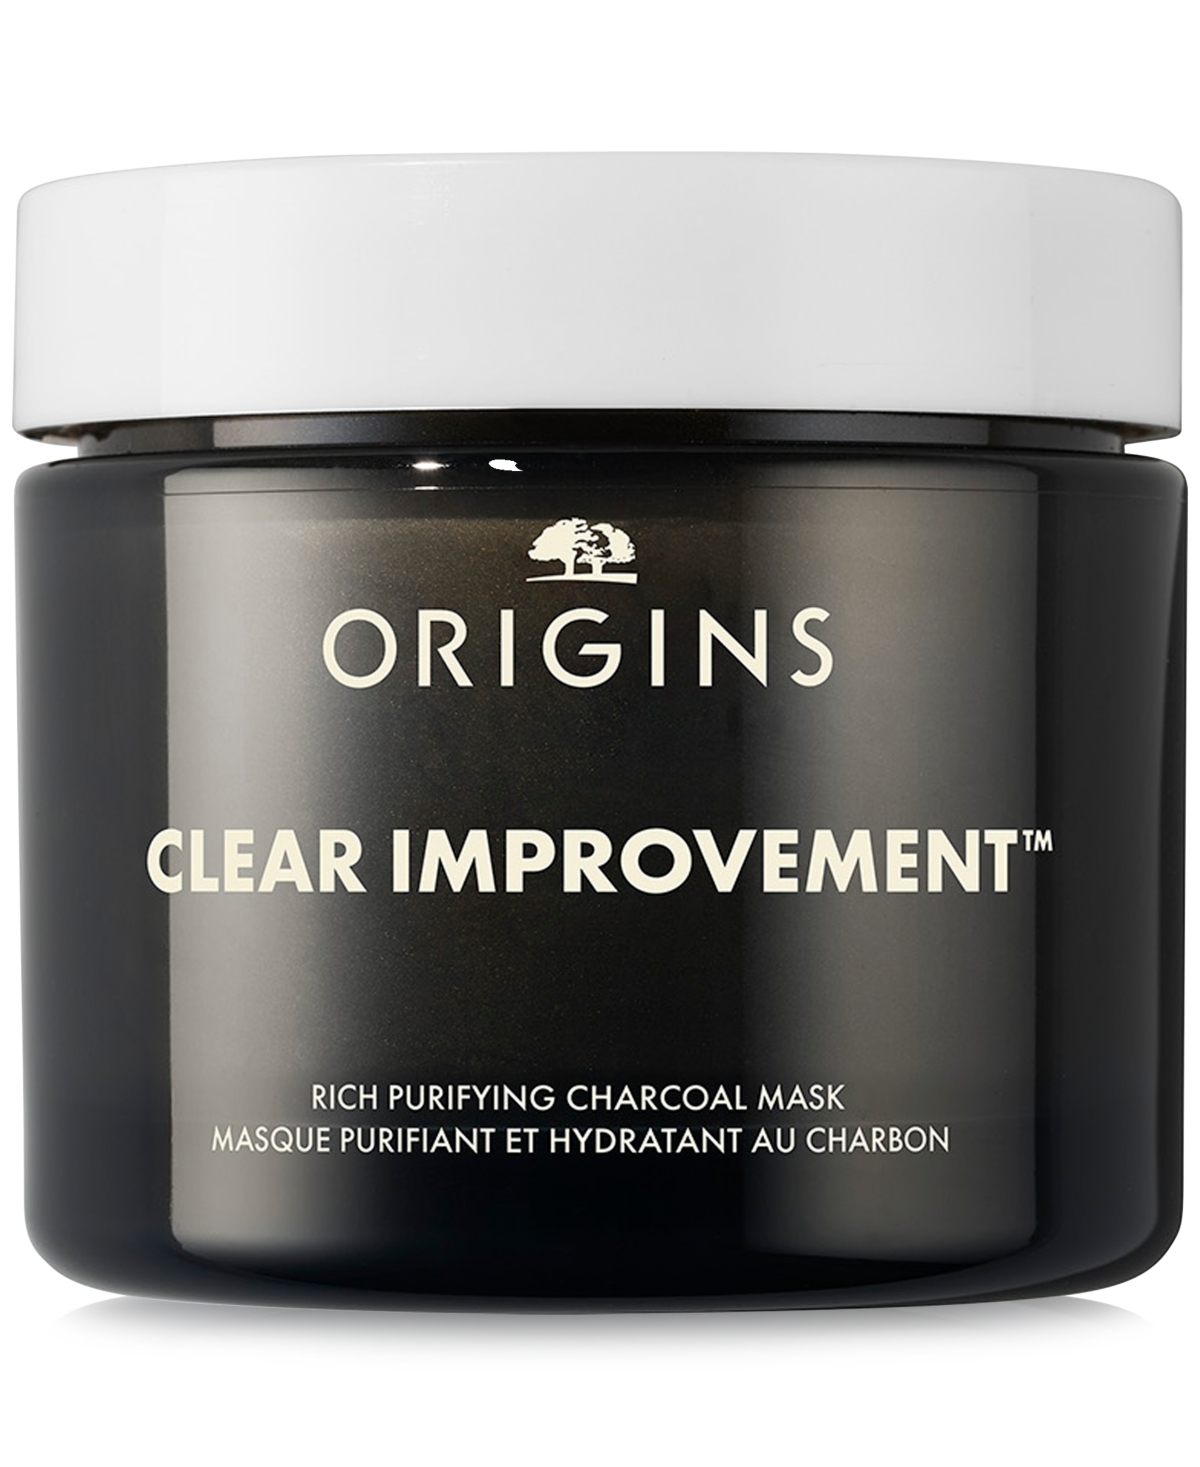 Origins Clear Improvement Rich Purifying Charcoal Face Mask, 2.5 Oz. In No Color